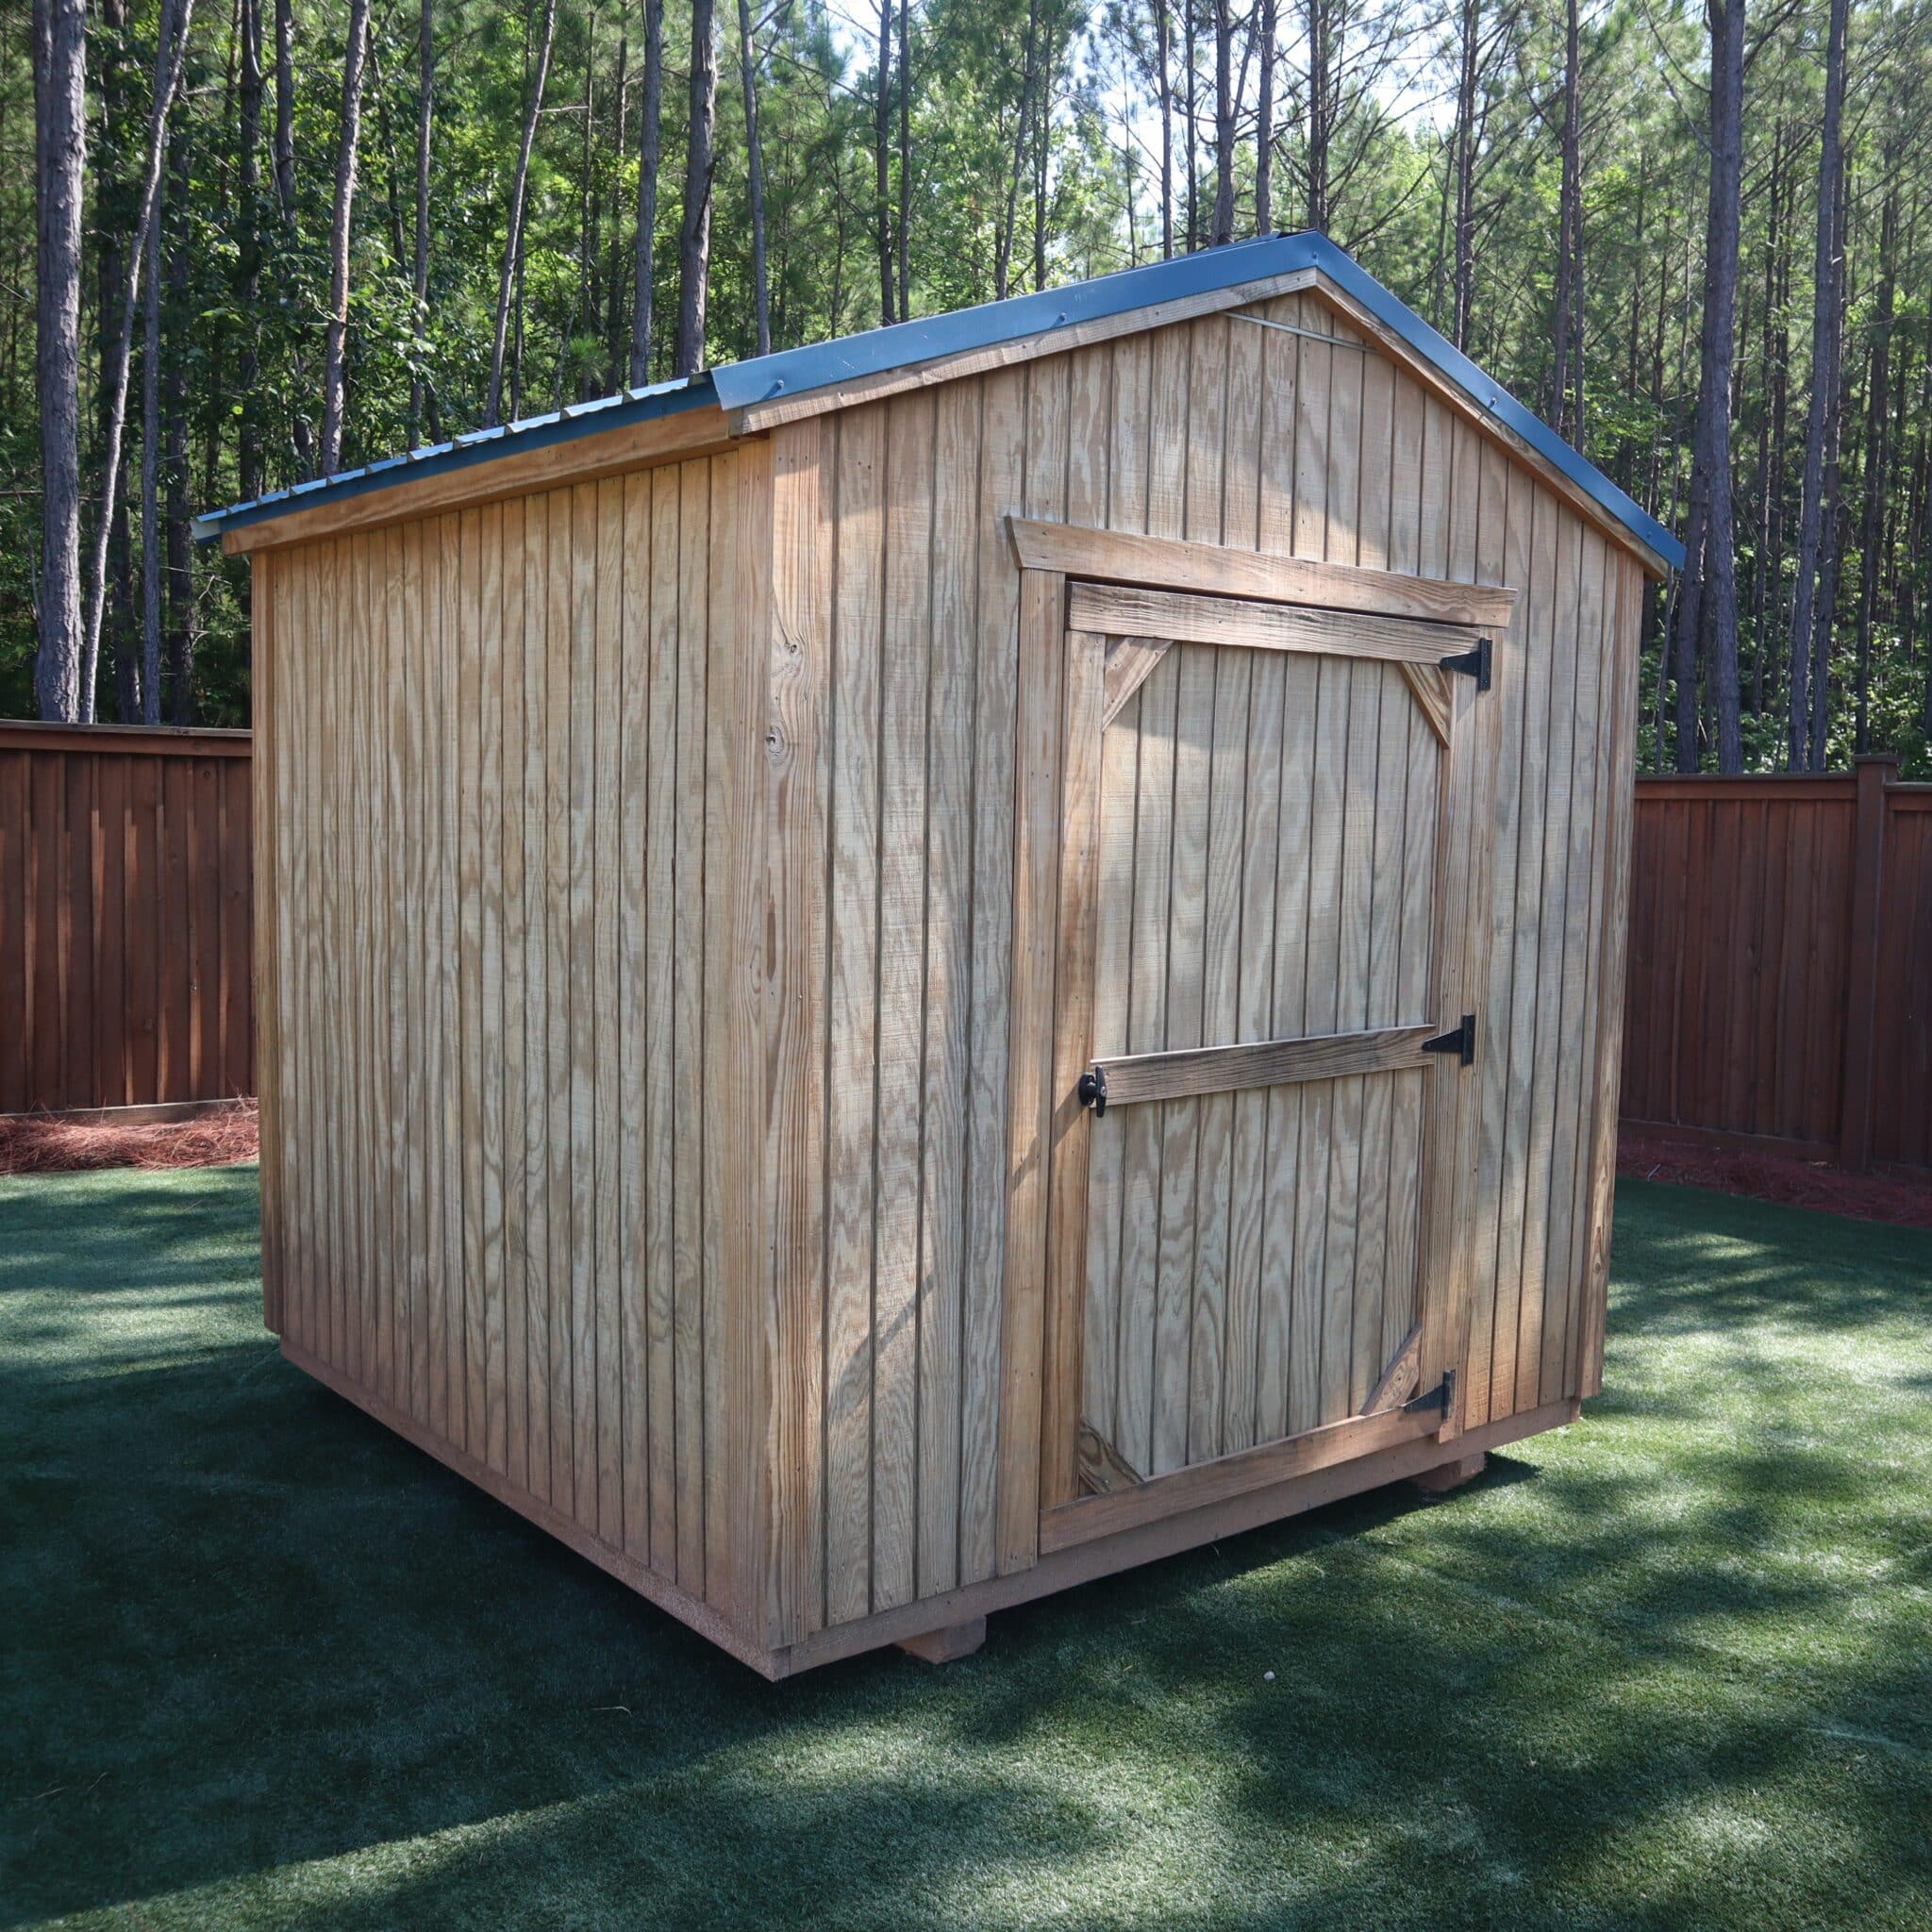 OutdoorOptions Eatonton Georgia 31024 Shed Picture Replace 67 Storage For Your Life Outdoor Options